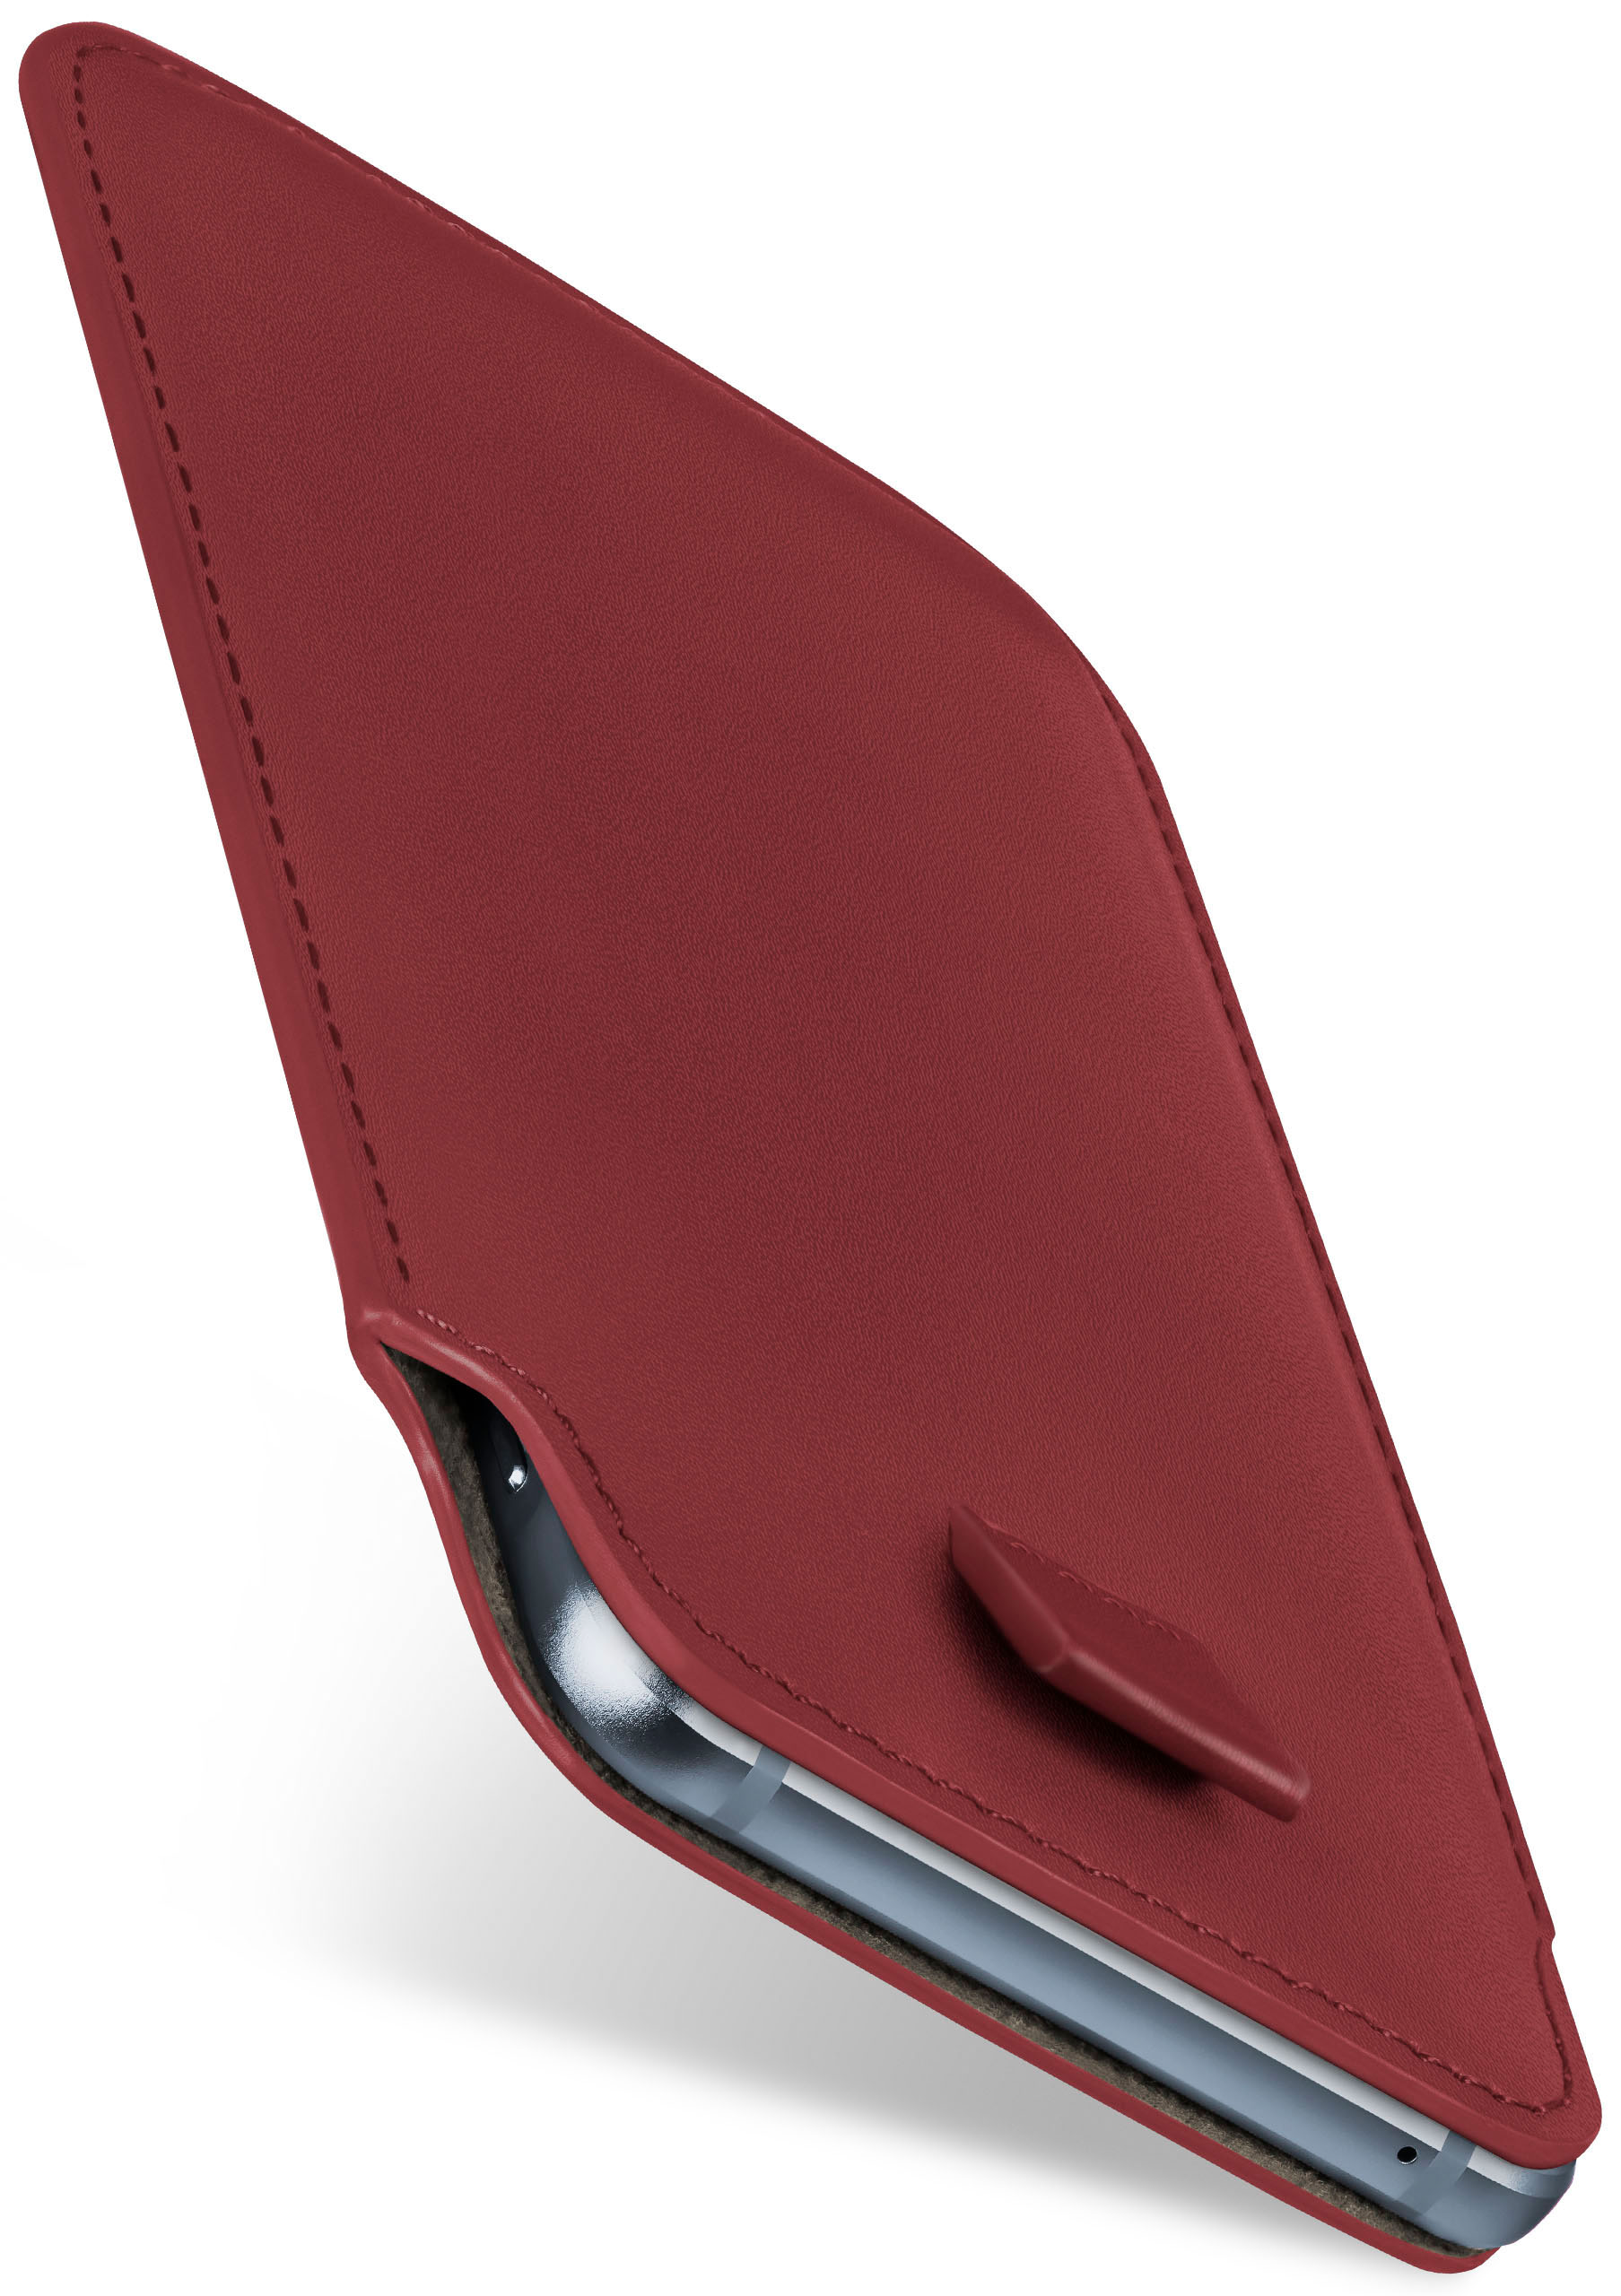 MOEX Cover, Slide OnePlus, Maroon-Red Full One, Case,